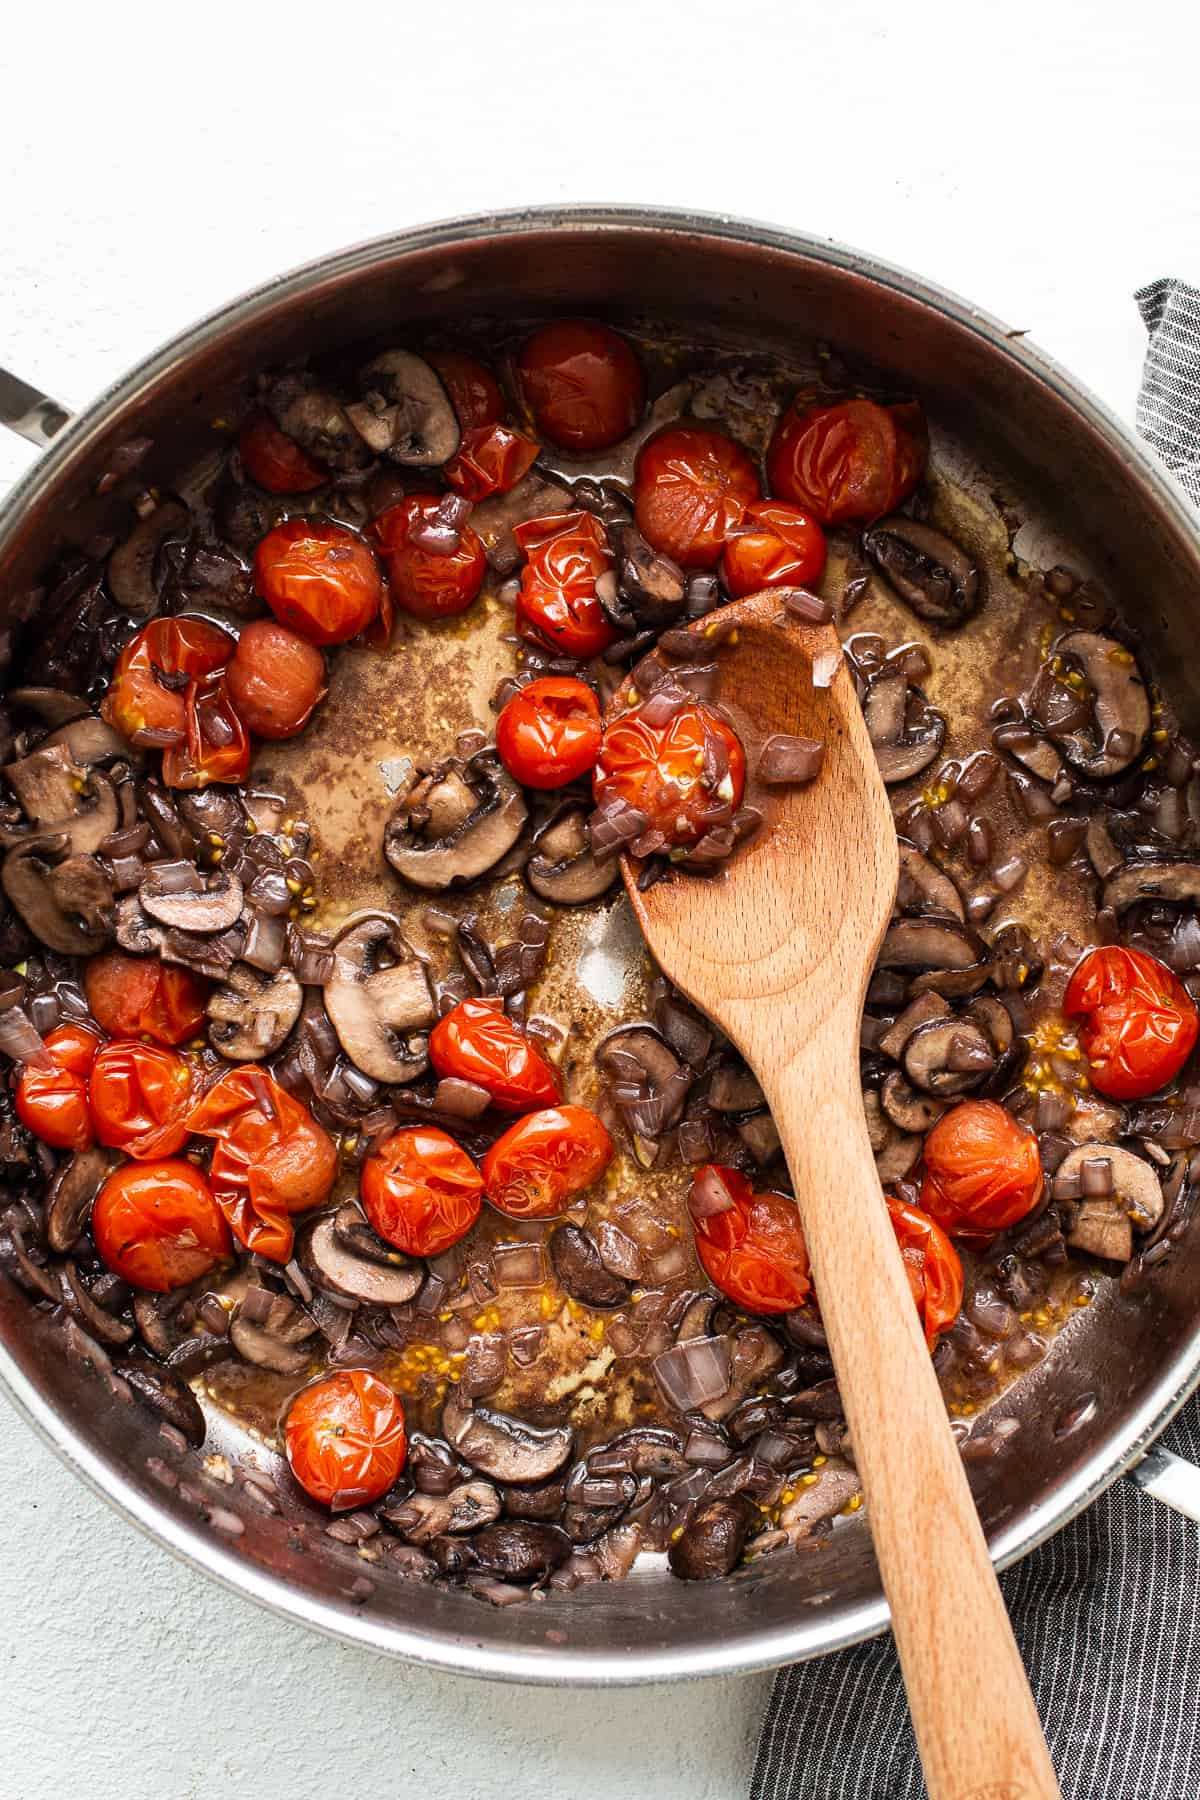 Mushrooms and tomatoes sautéing in a s،et.